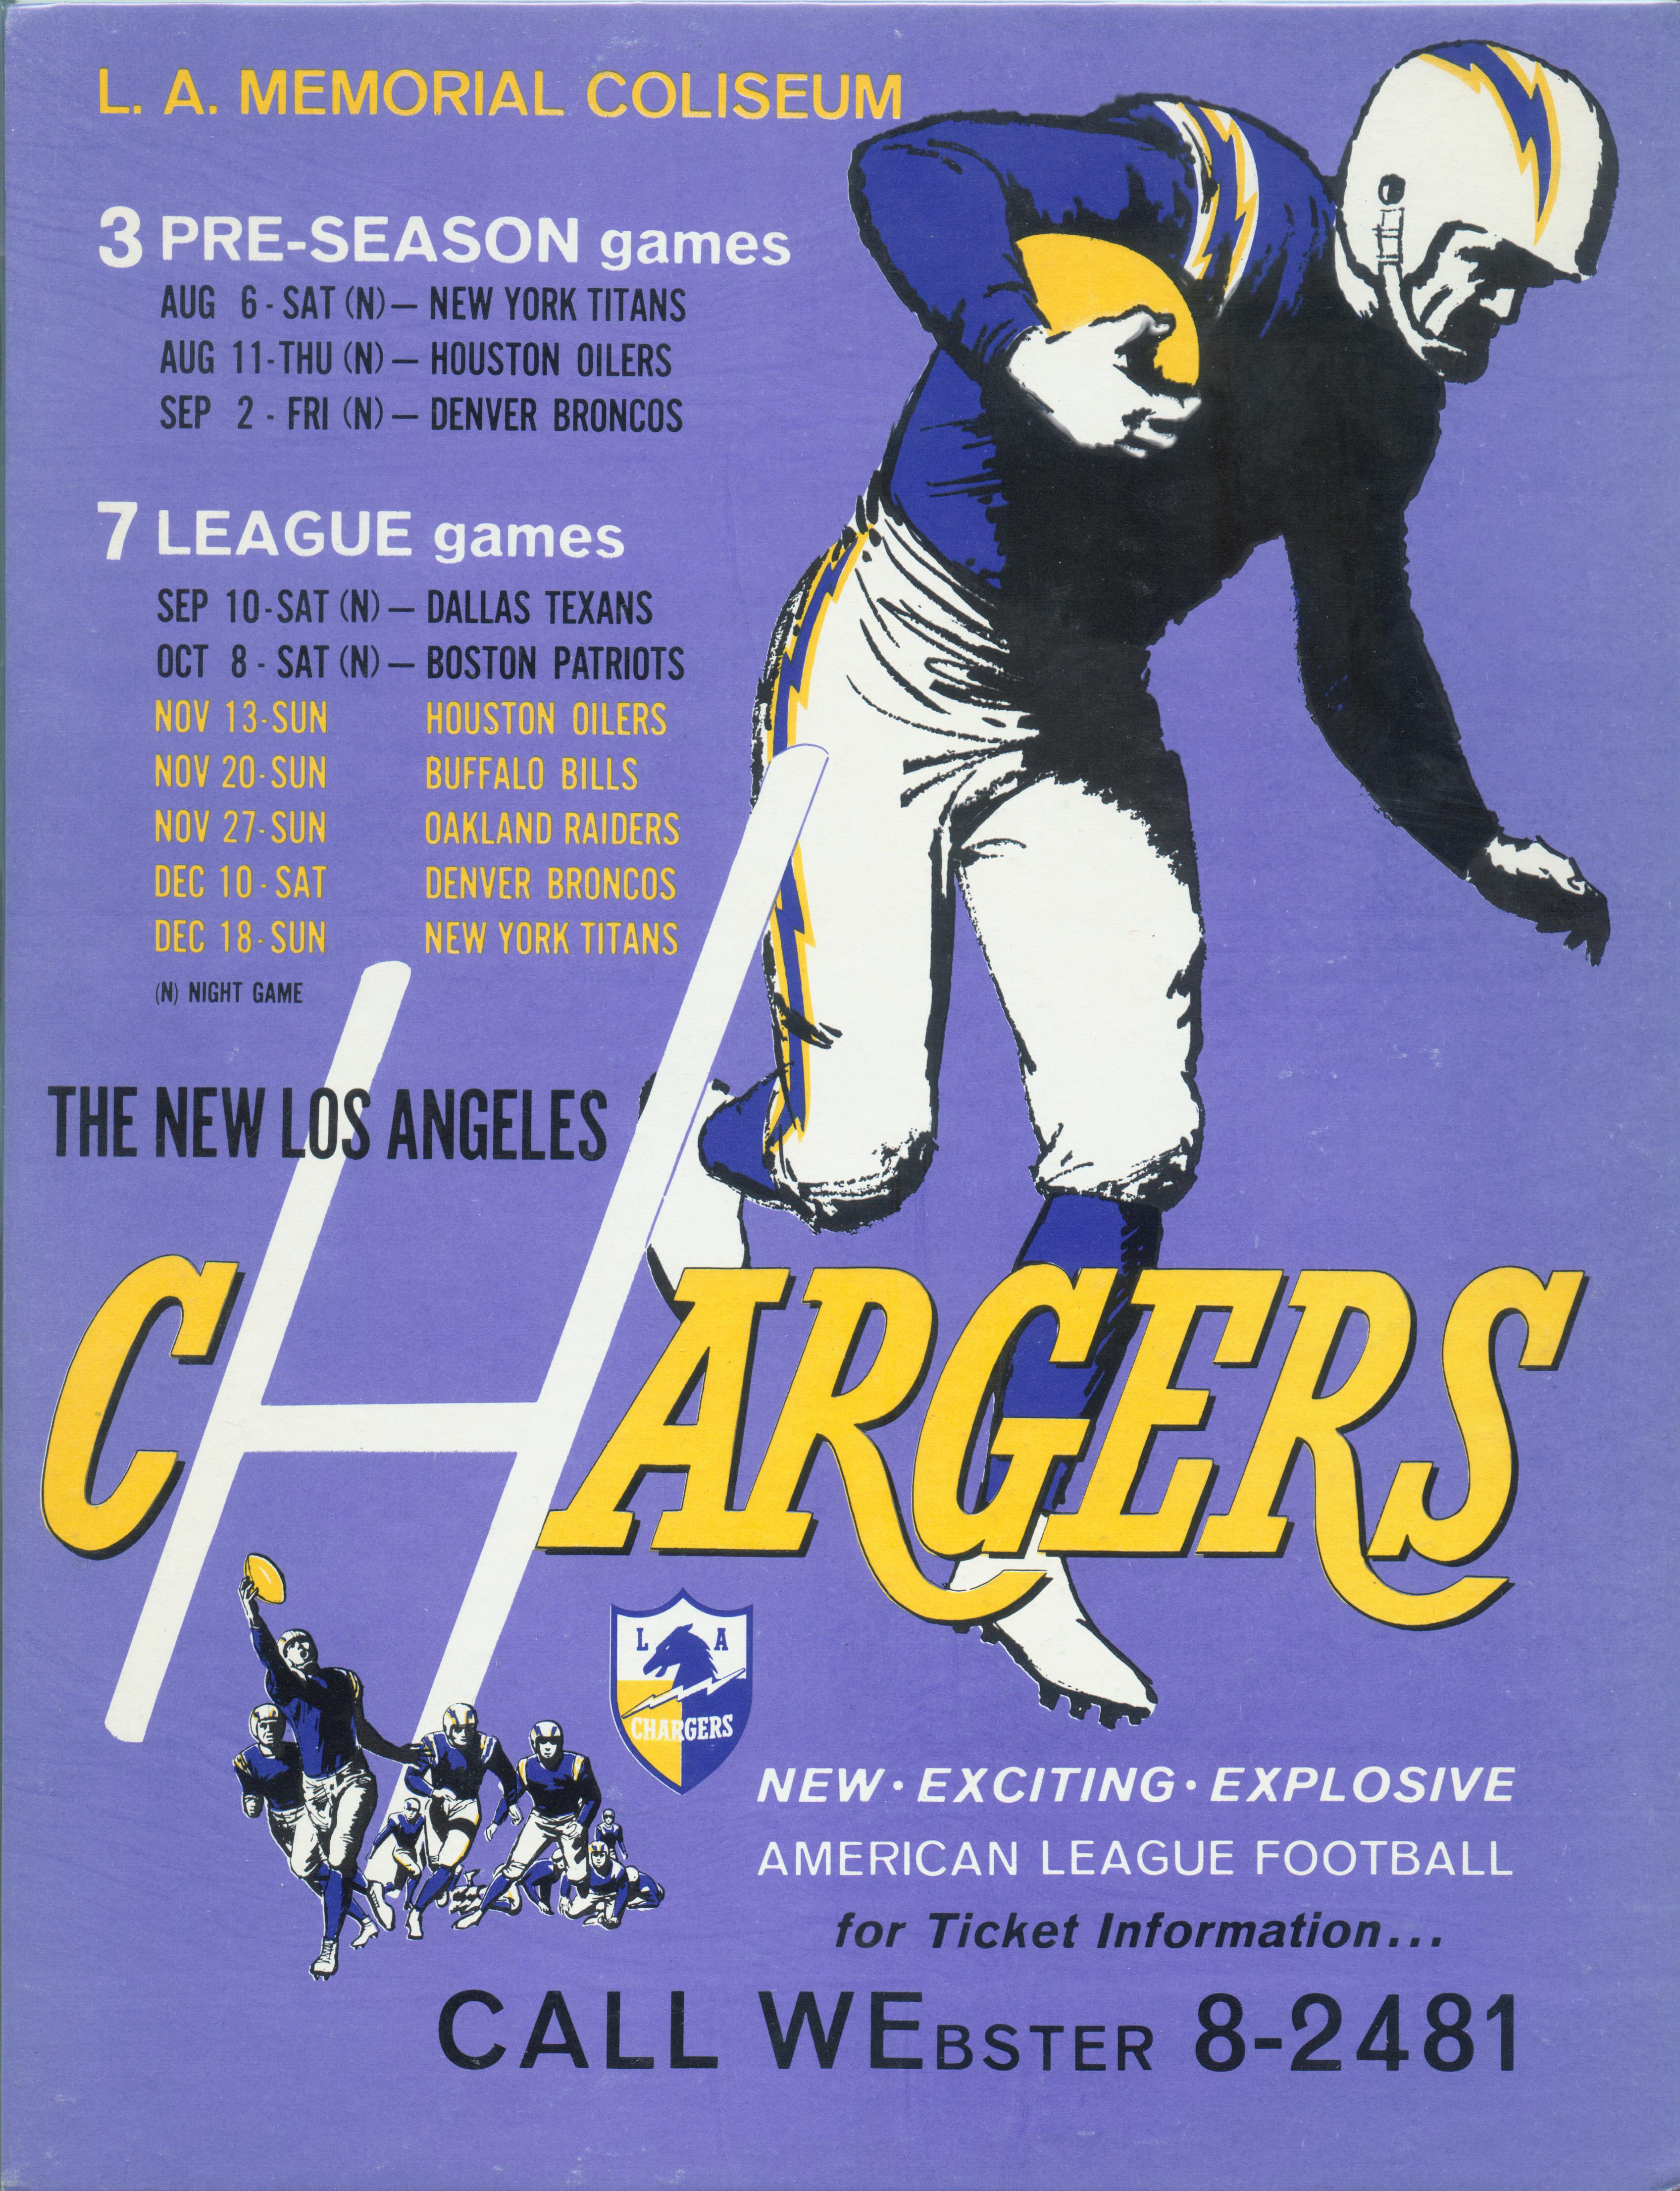 la chargers tickets